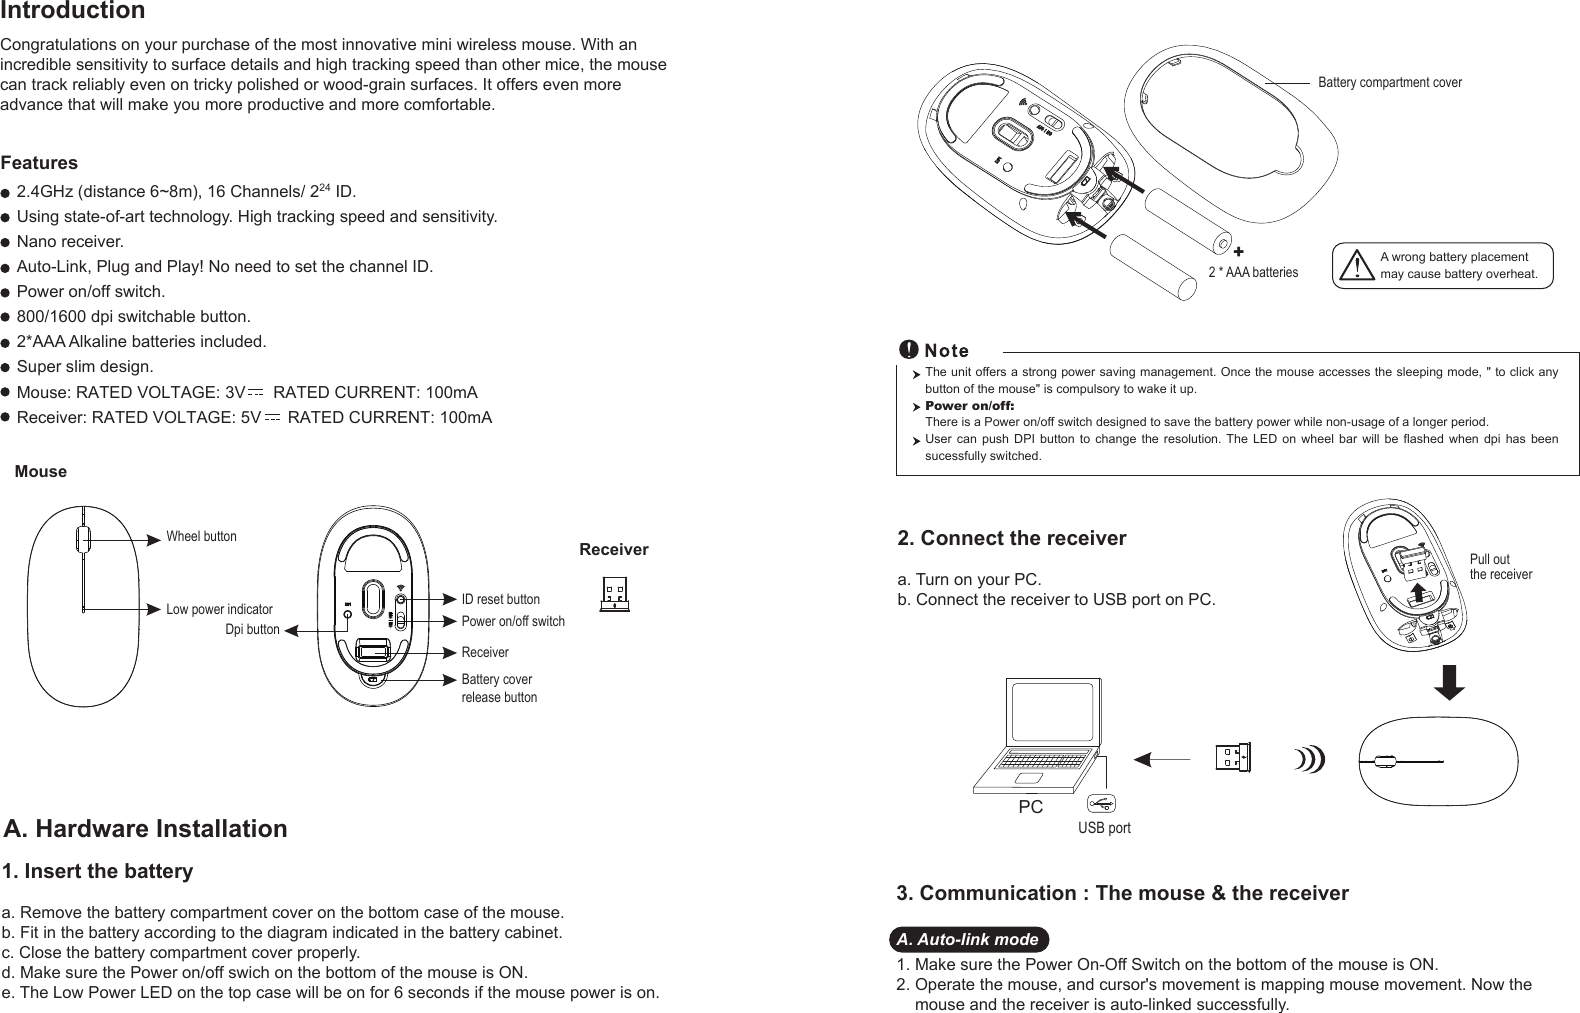 A. Hardware Installation1. Insert the batterya. Remove the battery compartment cover on the bottom case of the mouse.b. Fit in the battery according to the diagram indicated in the battery cabinet.c. Close the battery compartment cover properly.d. Make sure the Power on/off swich on the bottom of the mouse is ON.e. The Low Power LED on the top case will be on for 6 seconds if the mouse power is on. MouseWheel buttonDpi buttonID reset buttonPower on/off switchBattery cover release buttonReceiverLow power indicatorReceiverIntroductionA wrong battery placementmay cause battery overheat.2. Connect the receivera. Turn on your PC.b. Connect the receiver to USB port on PC.PCUSB portThe unit offers a strong power saving management. Once the mouse accesses the sleeping mode, &quot; to click any button of the mouse&quot; is compulsory to wake it up.Power on/off: There is a Power on/off switch designed to save the battery power while non-usage of a longer period.User  can  push  DPI  button  to  change  the  resolution. The  LED  on  wheel  bar  will  be  flashed  when  dpi  has  been sucessfully switched.3. Communication : The mouse &amp; the receiverA. Auto-link mode1. Make sure the Power On-Off Switch on the bottom of the mouse is ON.2. Operate the mouse, and cursor&apos;s movement is mapping mouse movement. Now the     mouse and the receiver is auto-linked successfully.+Battery compartment cover2 * AAA batteriesPull out the receiverCongratulations on your purchase of the most innovative mini wireless mouse. With anincredible sensitivity to surface details and high tracking speed than other mice, the mousecan track reliably even on tricky polished or wood-grain surfaces. It offers even moreadvance that will make you more productive and more comfortable.2.4GHz (distance 6~8m), 16 Channels/ 224 ID.Using state-of-art technology. High tracking speed and sensitivity.Nano receiver.Auto-Link, Plug and Play! No need to set the channel ID.Power on/off switch.800/1600 dpi switchable button.2*AAA Alkaline batteries included. Super slim design.FeaturesReceiver: RATED VOLTAGE: 5V      RATED CURRENT: 100mAMouse: RATED VOLTAGE: 3V      RATED CURRENT: 100mA